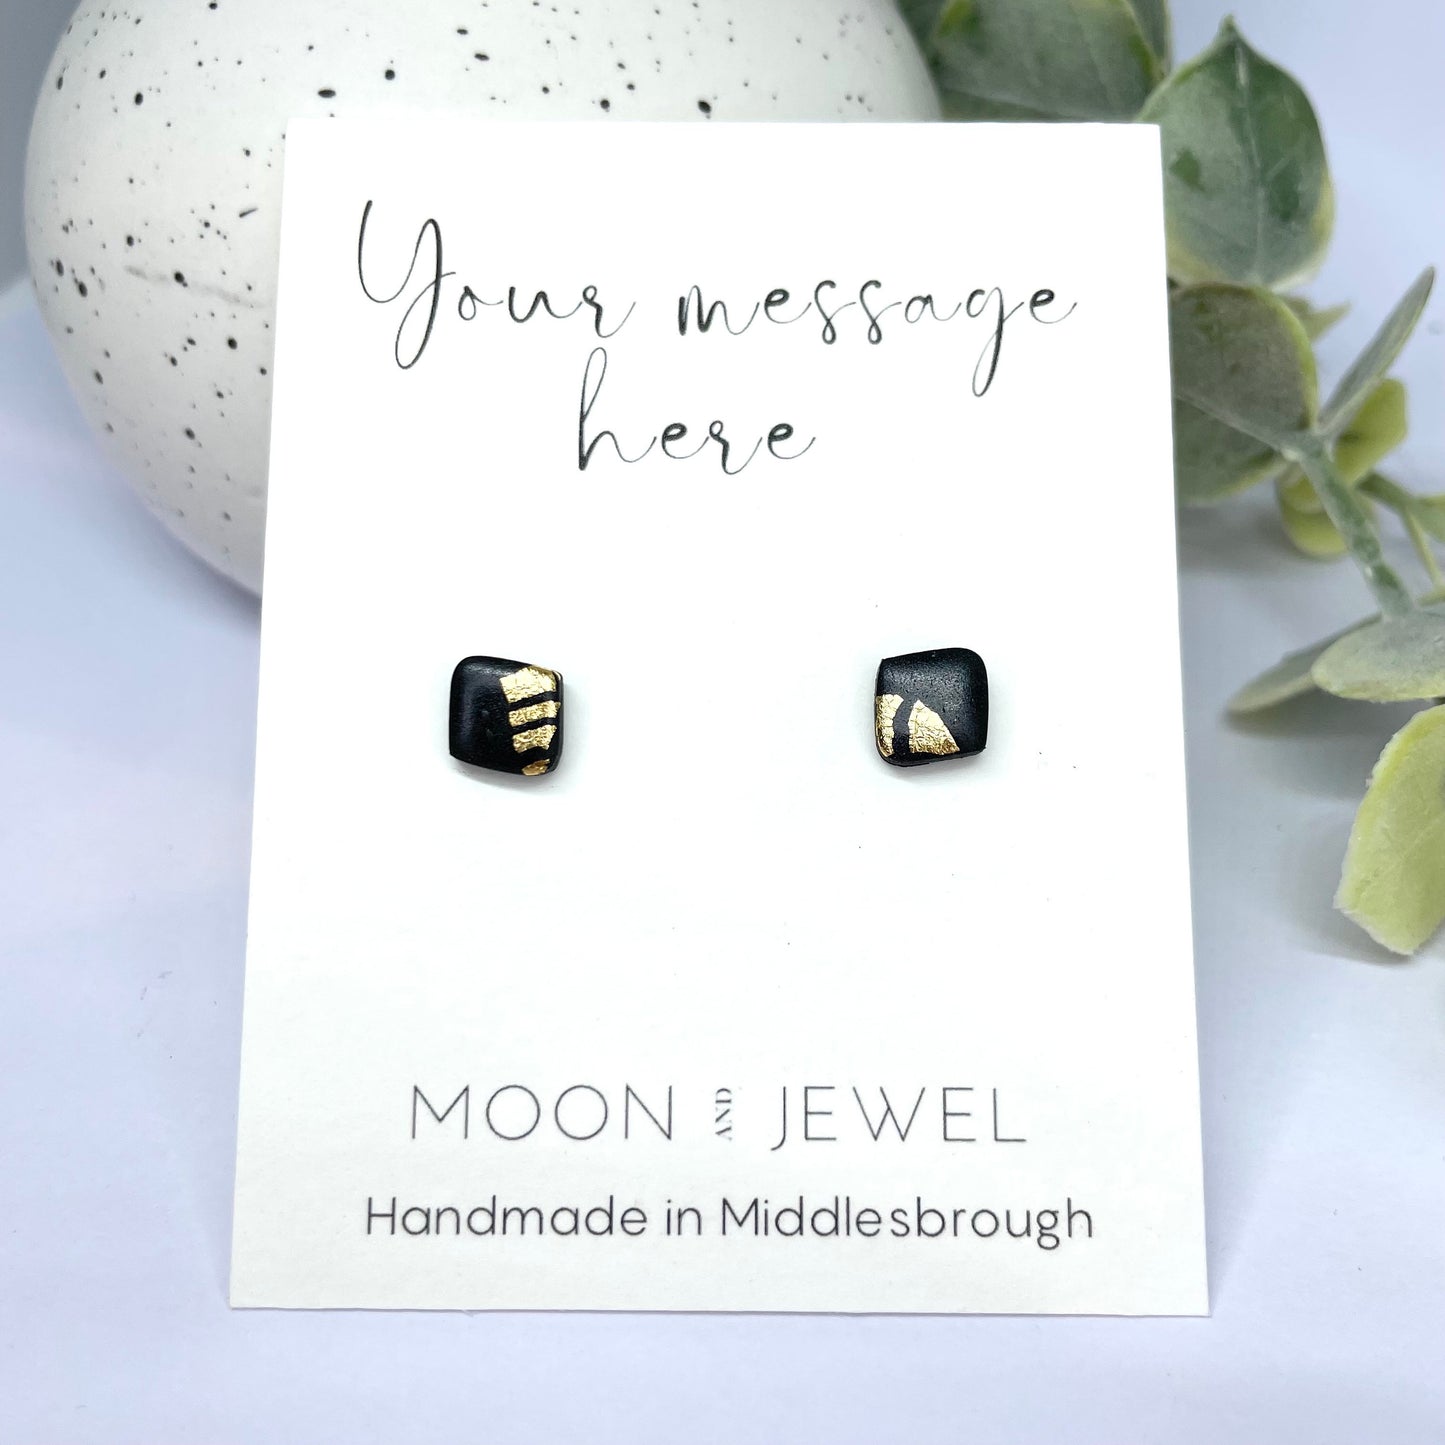 Personalised gift message, personalised gift for her, personalised jewellery, add your own message gift, name earrings, name jewellery,